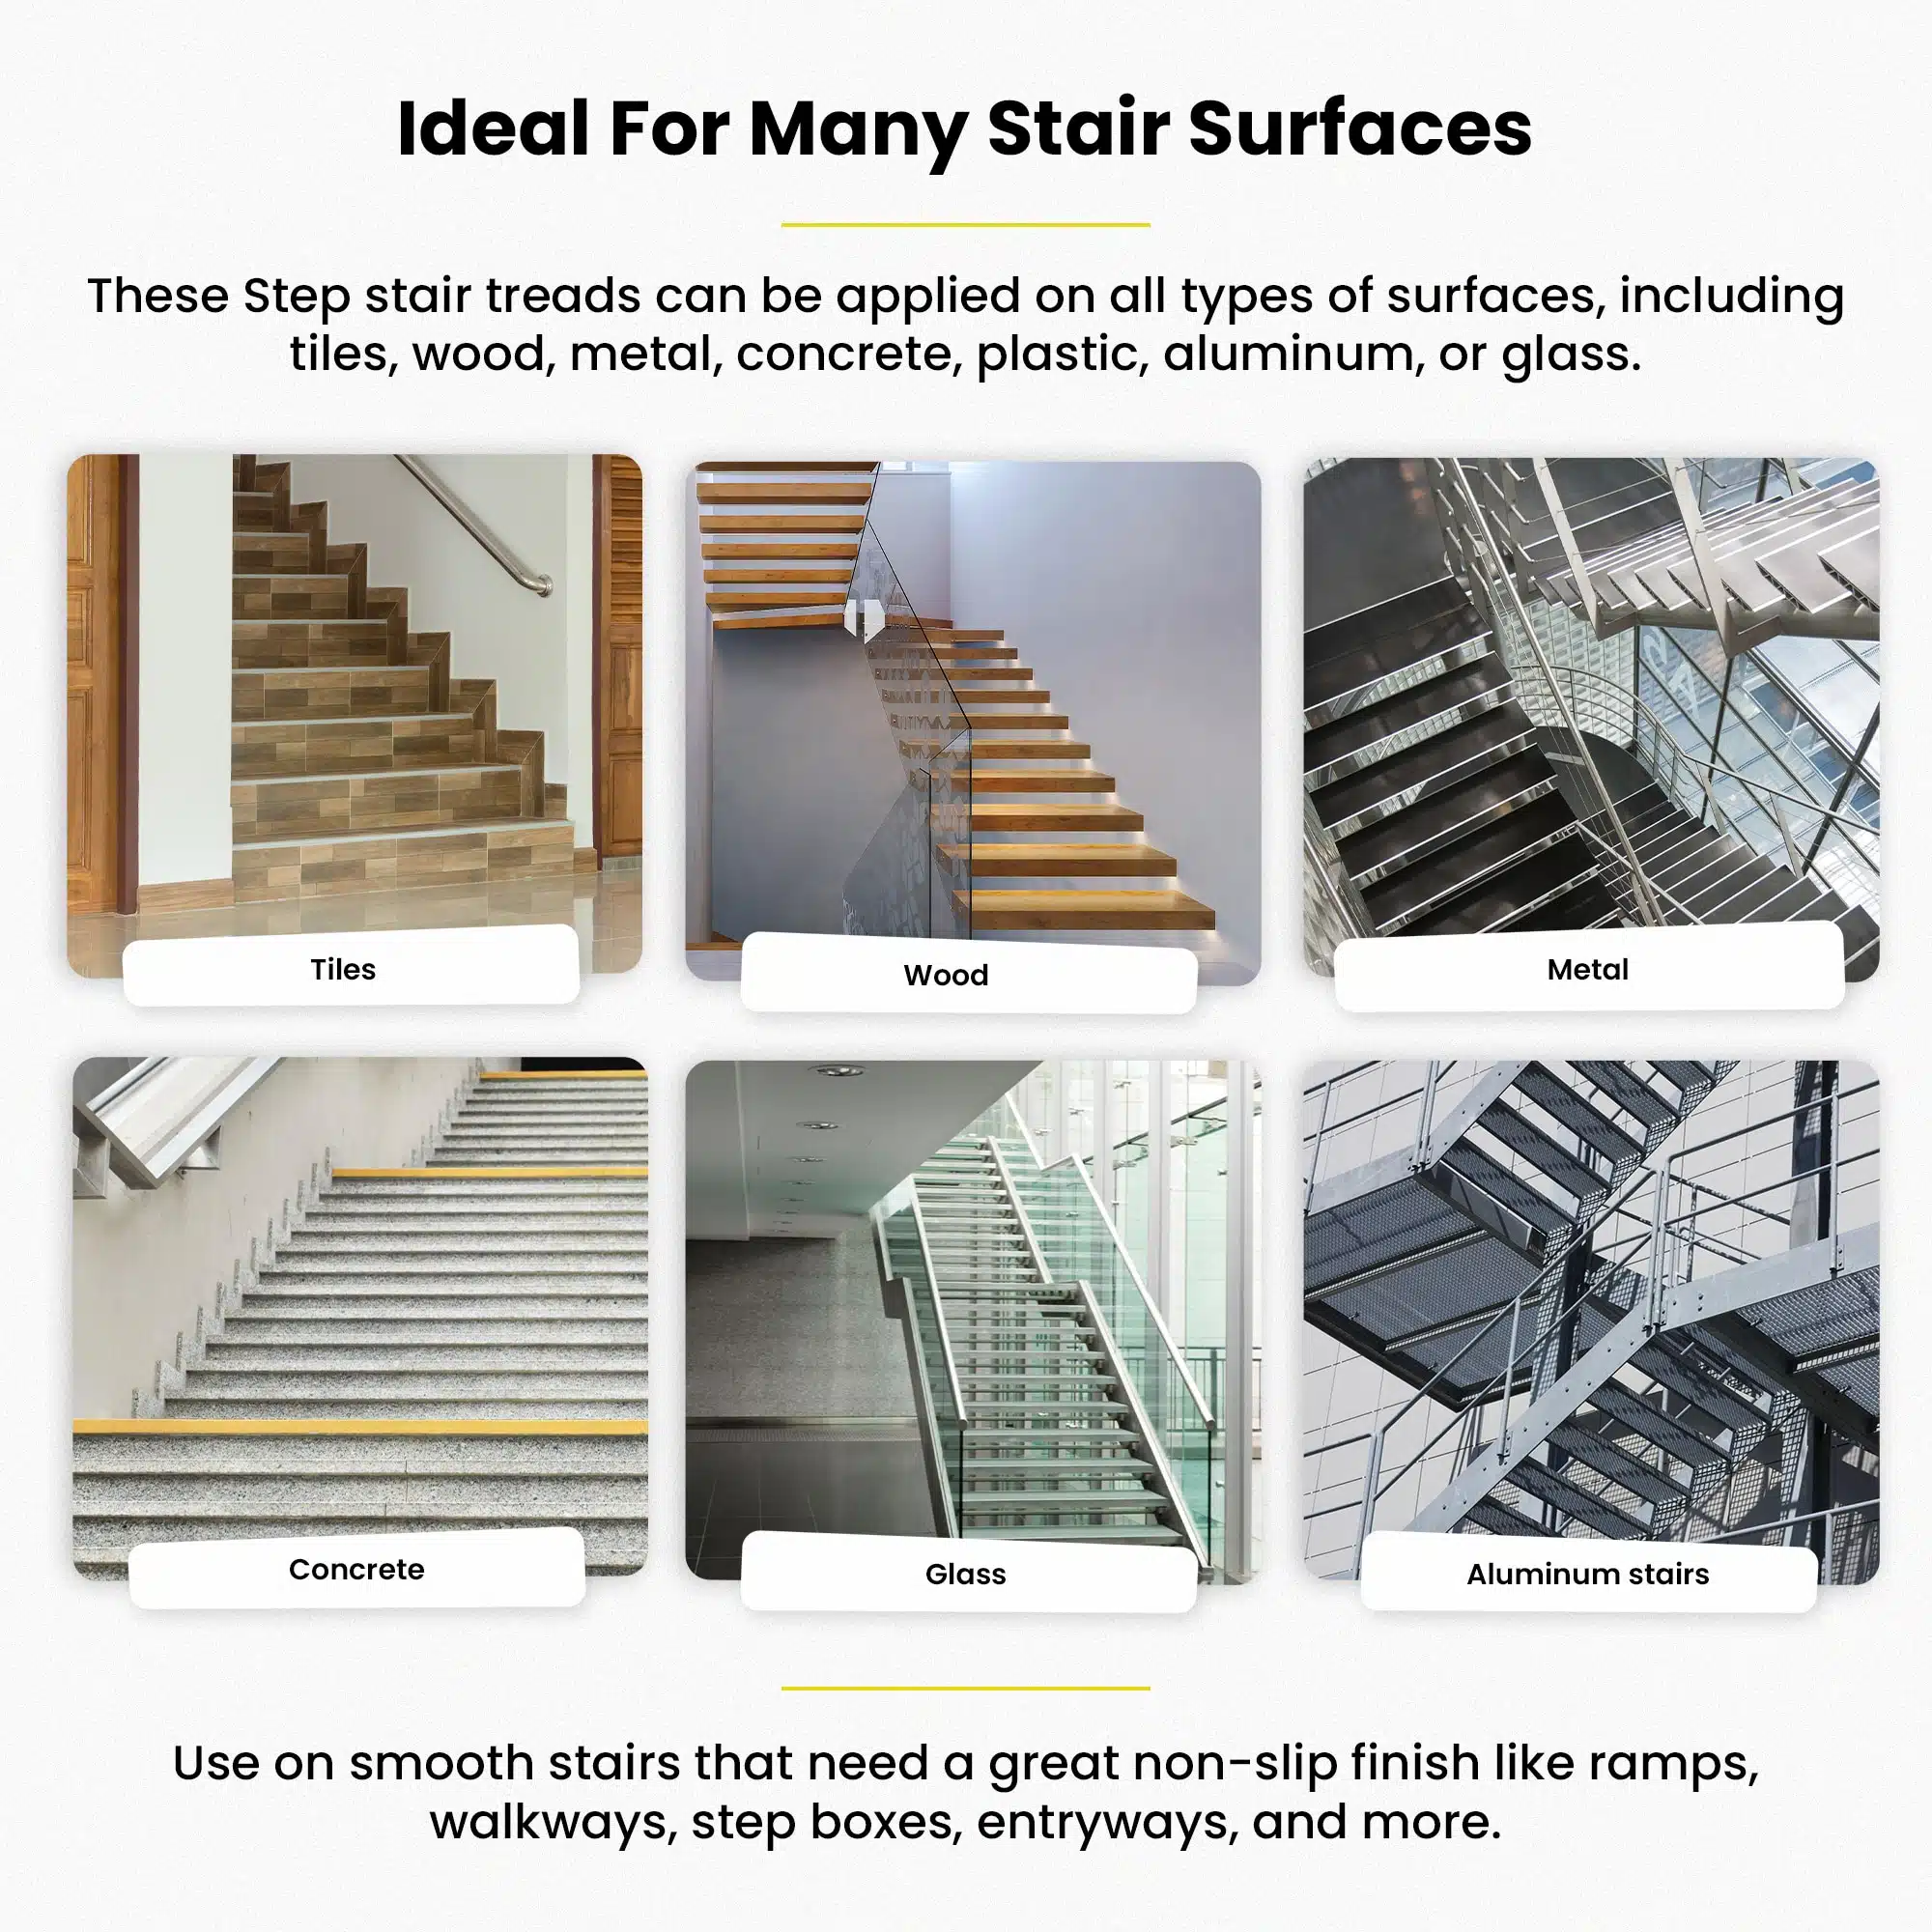 Non-slip stair treads on different surfaces such as wooden stairs and concrete stairs